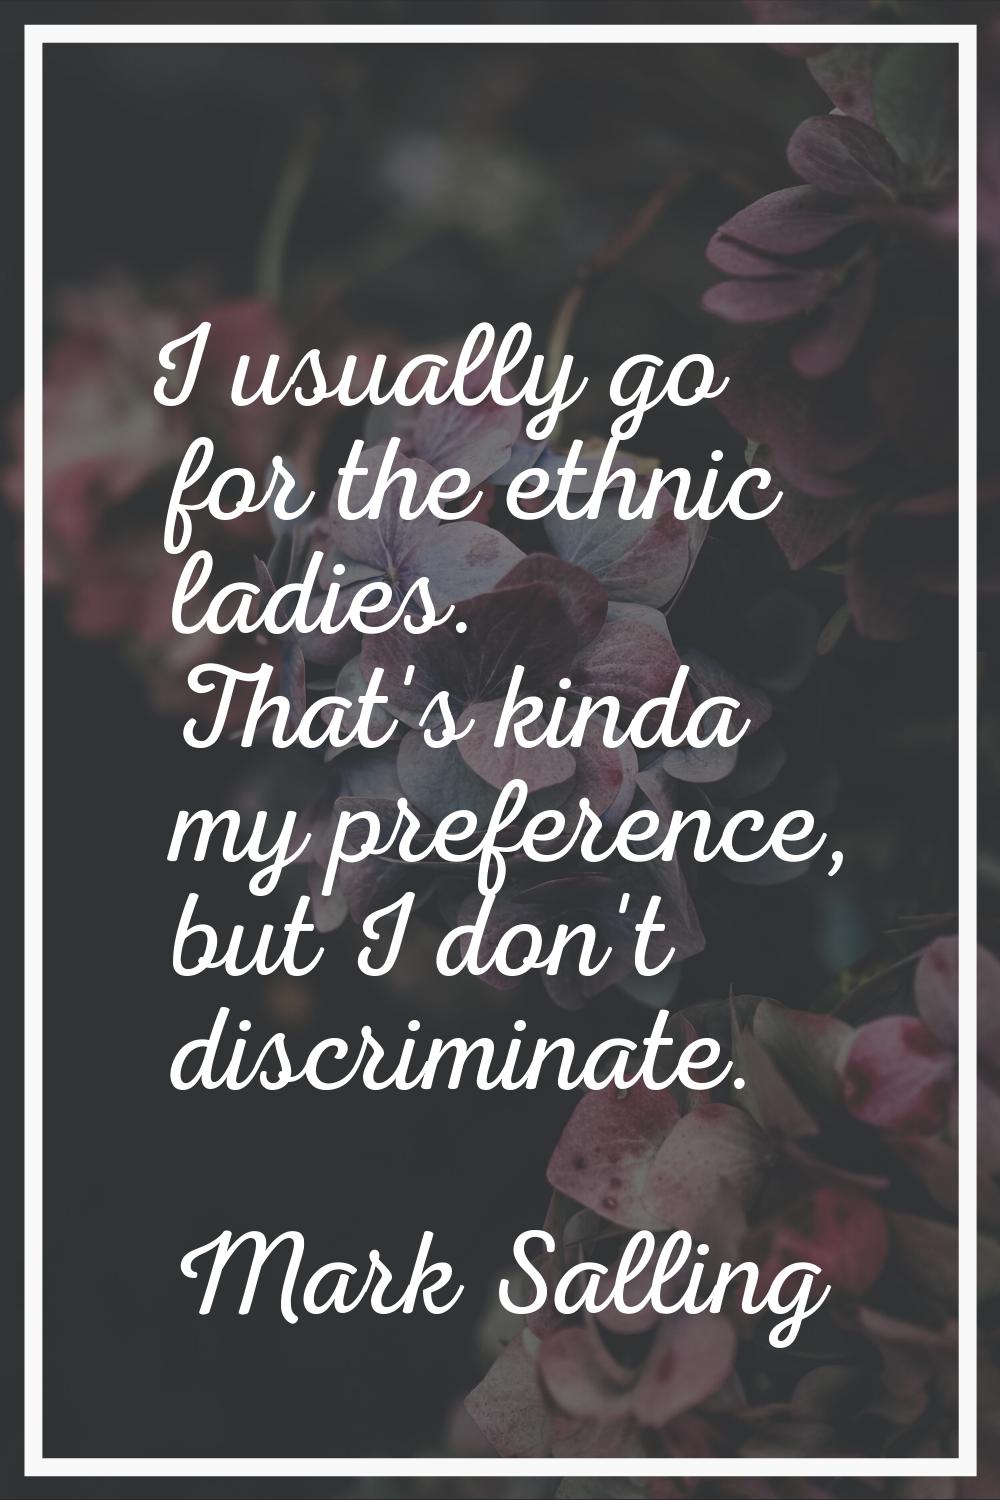 I usually go for the ethnic ladies. That's kinda my preference, but I don't discriminate.